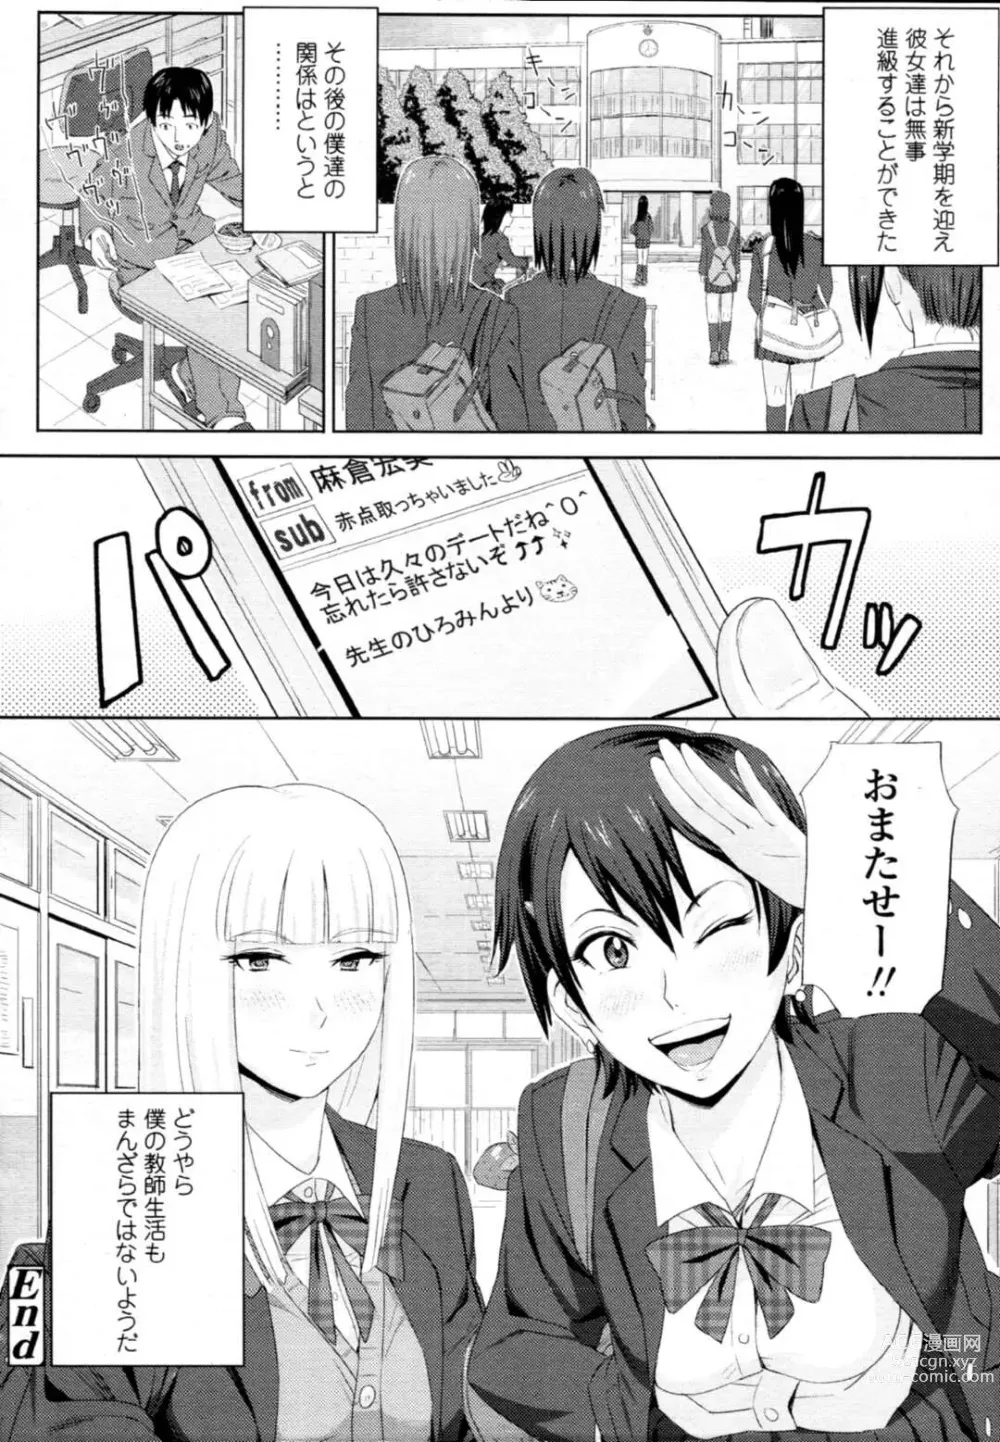 Page 20 of doujinshi Sassy Gal JKs Having Harem Sex with Teachers... Lewd Girls Climax by Letting Him Fuck Them Vaginally and Anally!